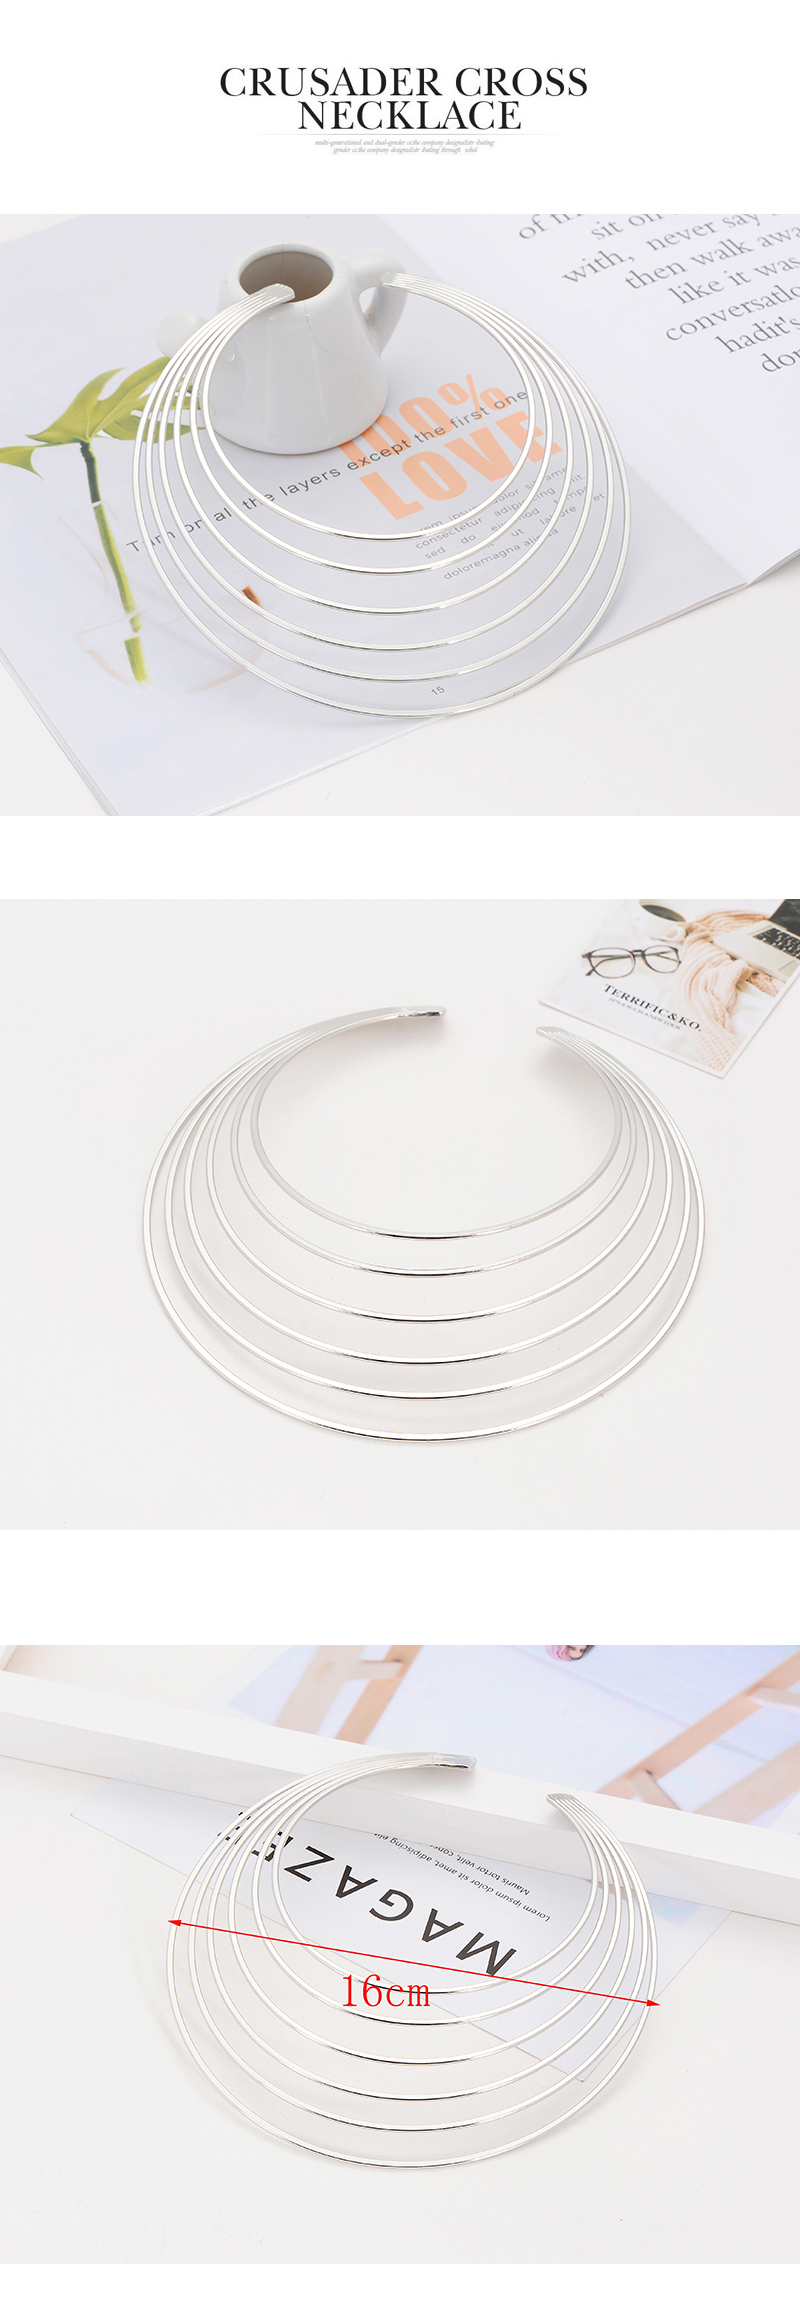 Fashion Silver Color Circular Ring Shape Decorated Necklace,Chokers